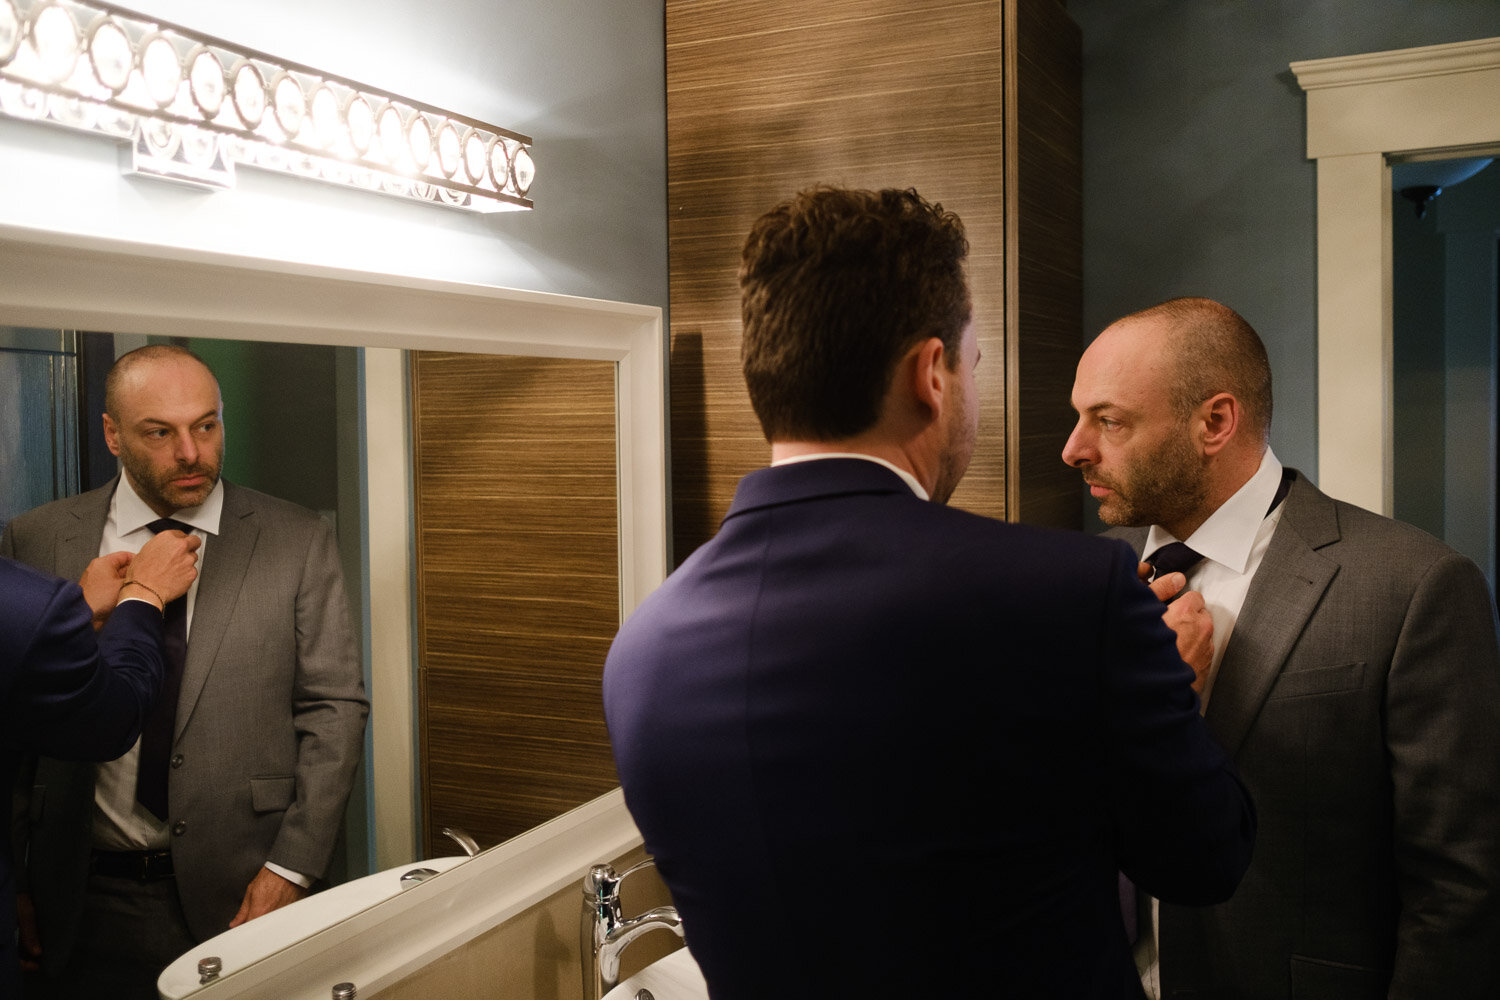 photograph of a groom helping his groomsmen get ready